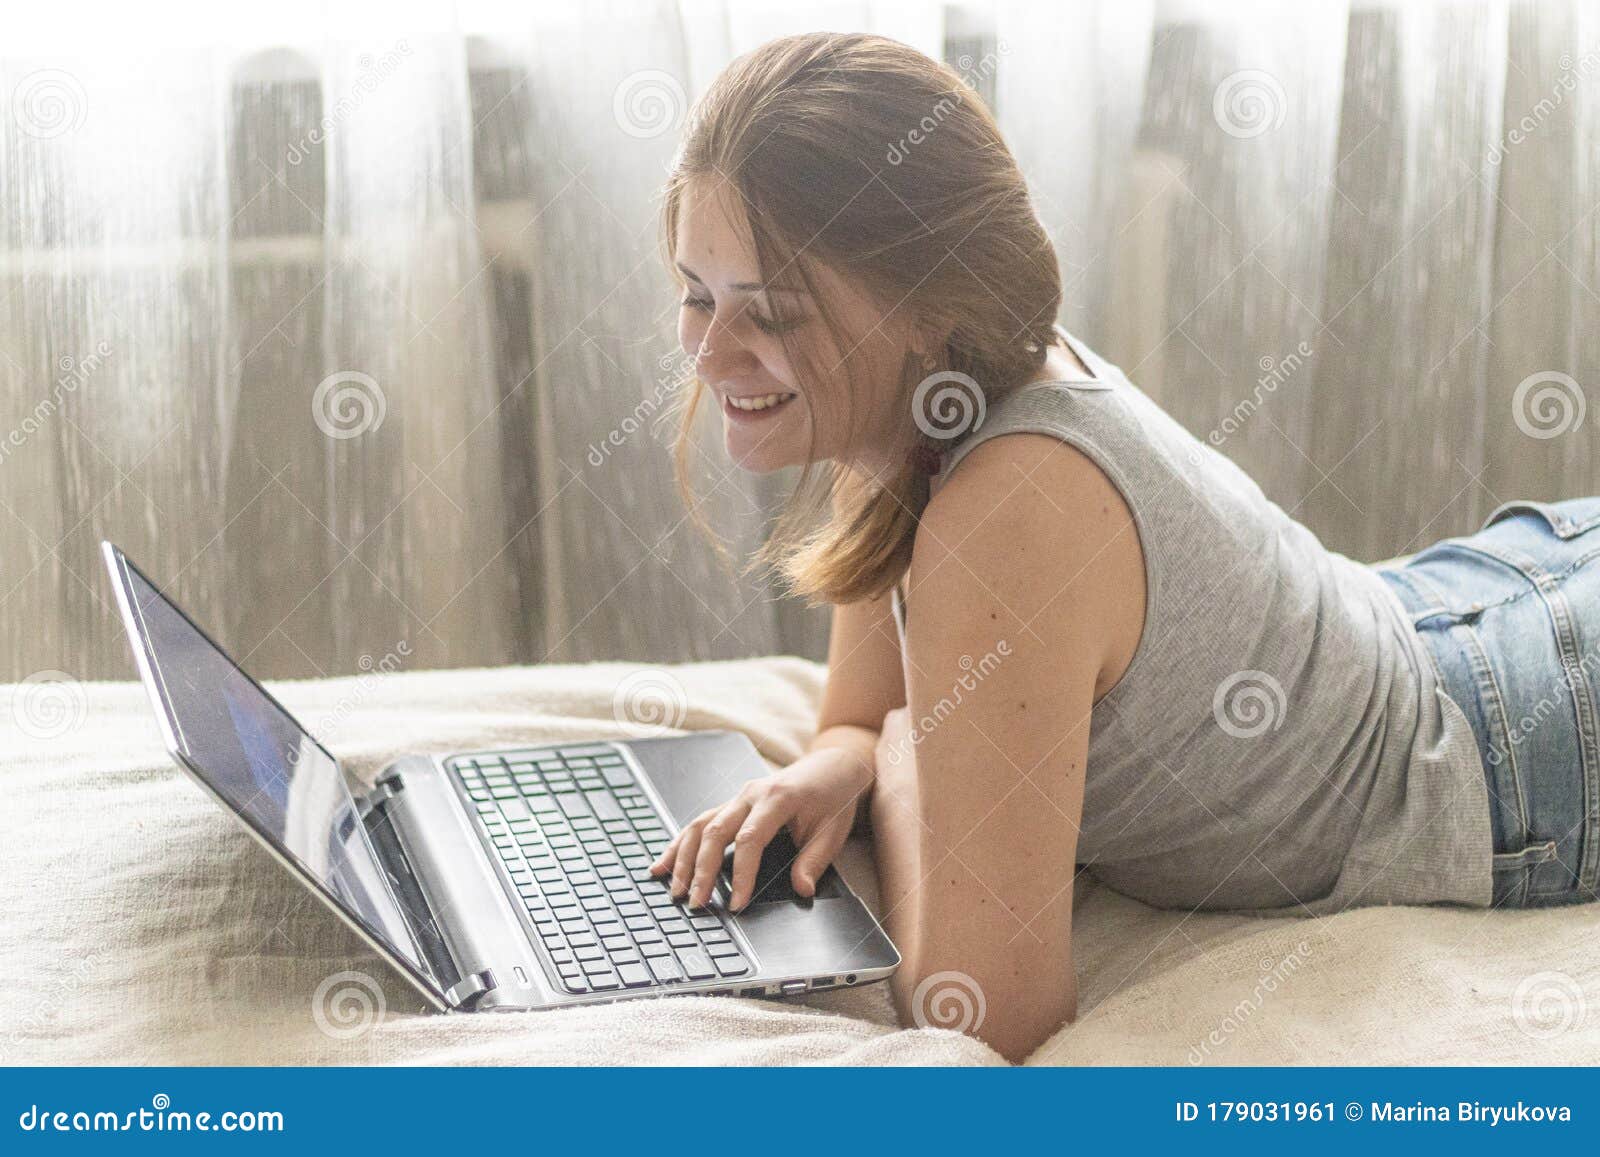 Young Beautiful Woman Watching Movie Online. Watching Funny Content, Images  or Videos. Cute Girl Sitting with Computer and Doing Stock Image - Image of  female, fullbody: 179031961